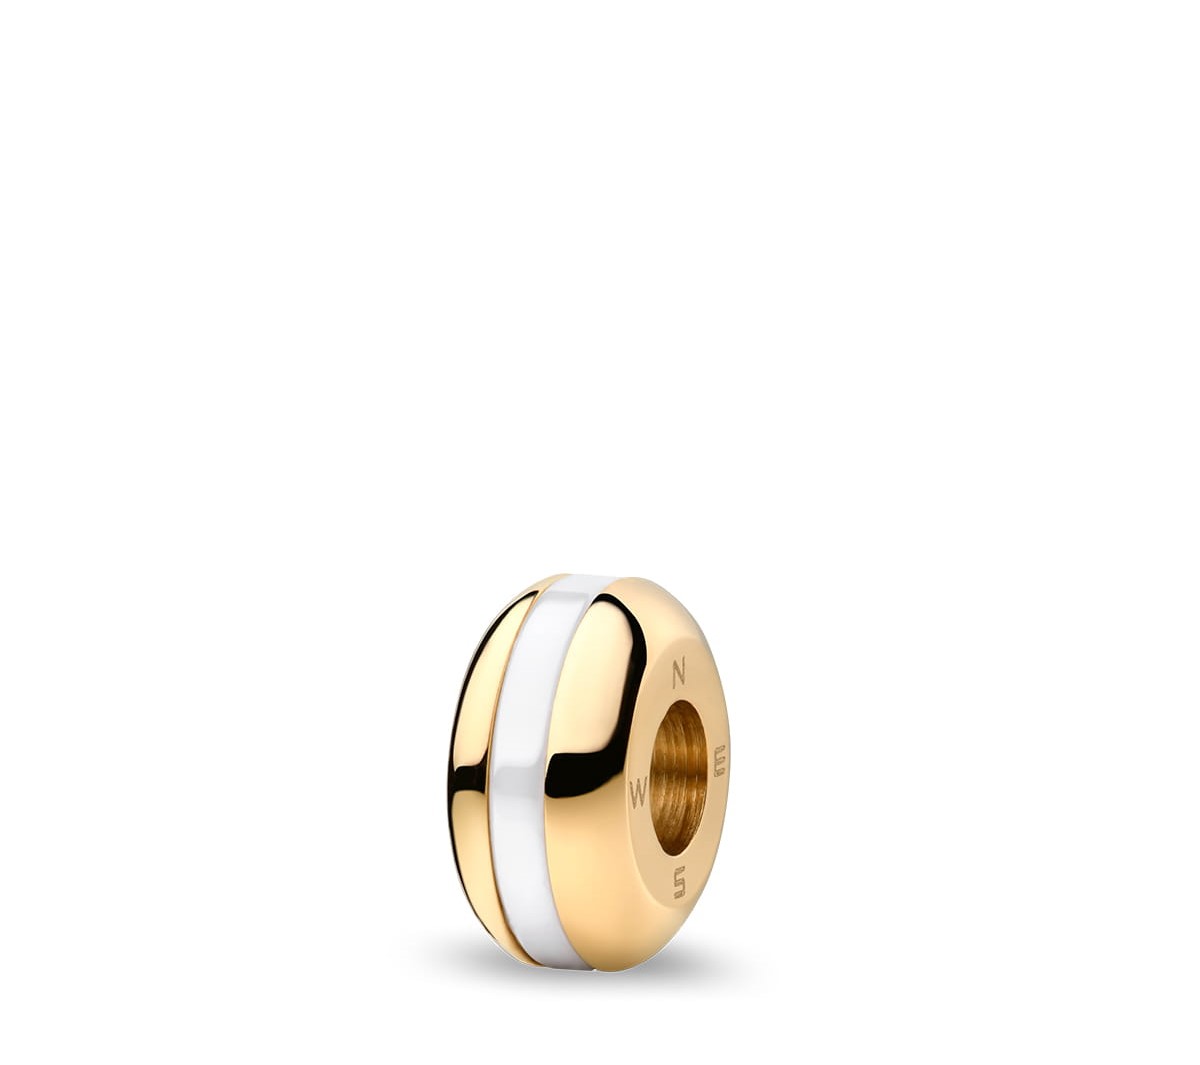 Bering Charm Lovely-1 Edelstahl Gelbgold IP Keramik weiß ARCTIC SYMPHONY COLLECTION